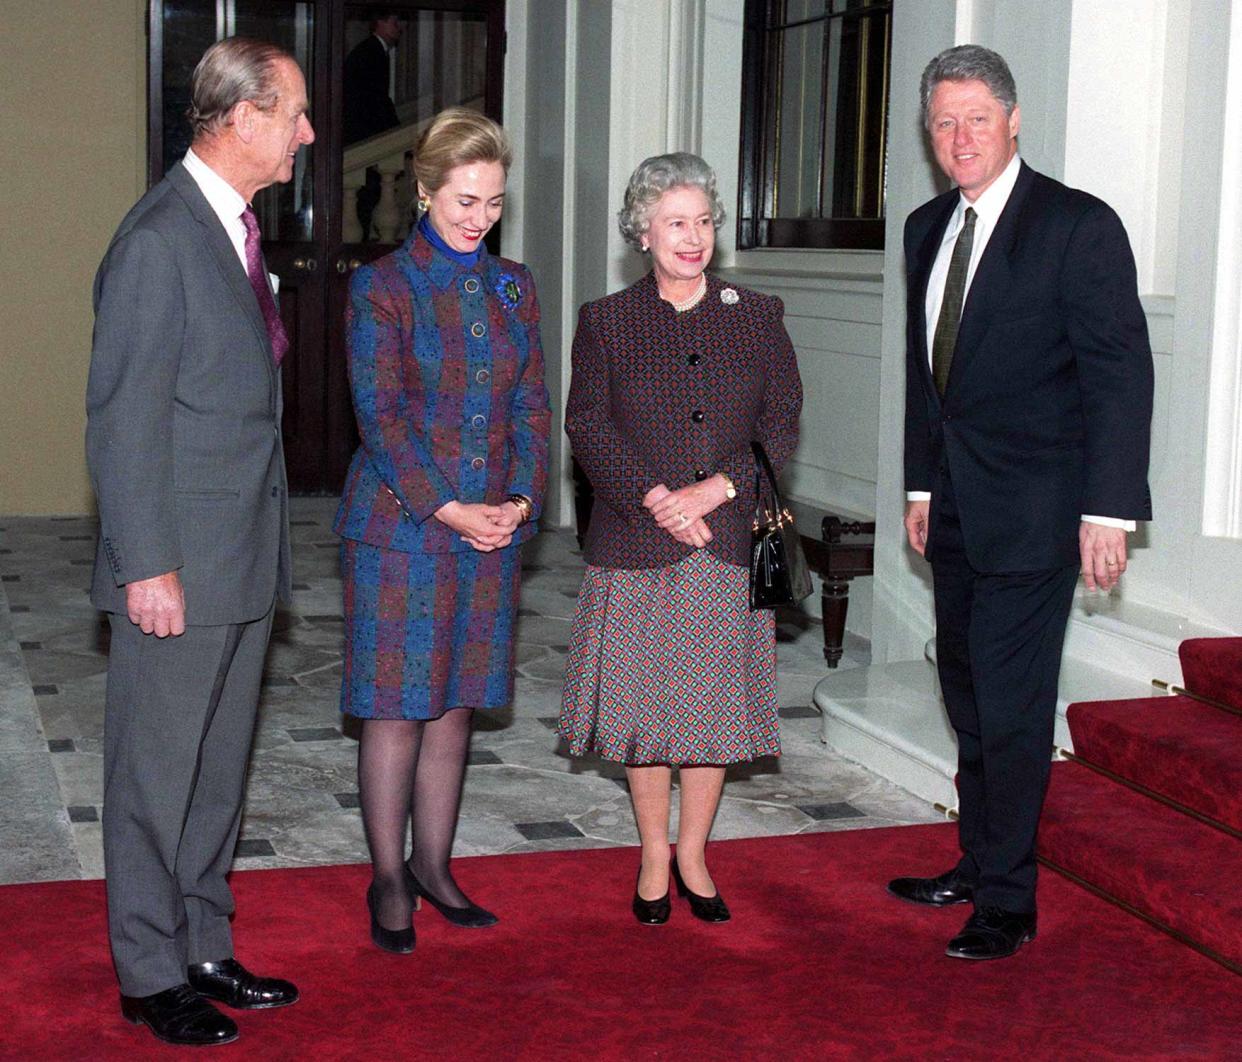 Queen Elizabeth II and Prince Philip with the Clintons, all in day clothes, Prince Philip cracking a joke and Hillary Clinton wearing a wide smile.